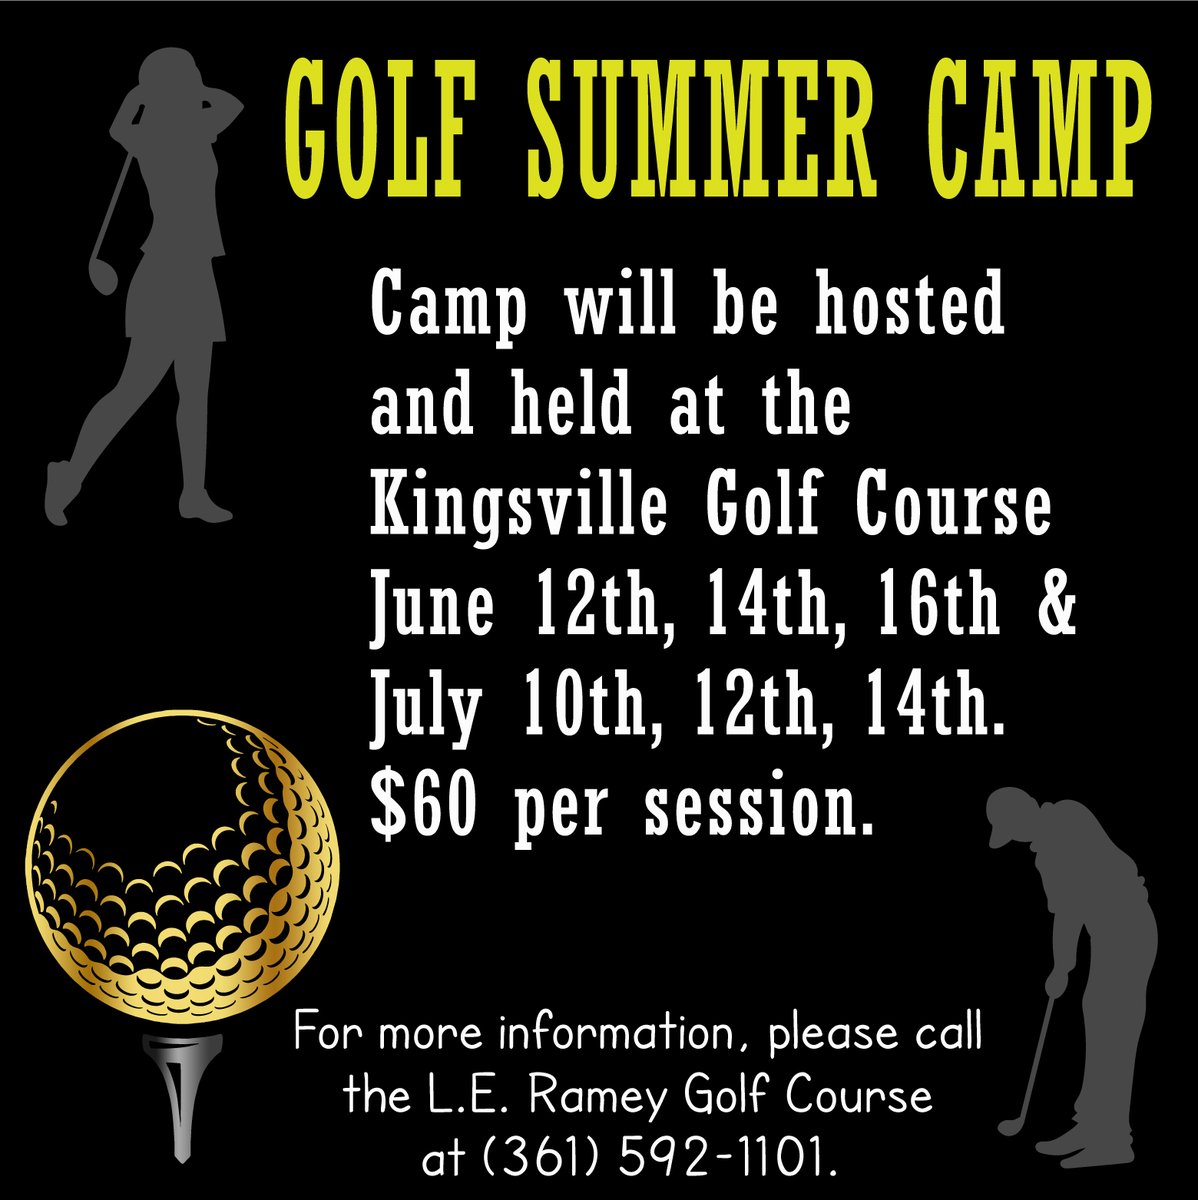 Kingsville ISD #GolfSummerCamp information! We are excited to work with the youth of our community! We can’t wait to see you all! #GoldStandard #BlackReign #braHMaKINGdom #GoBrahmasGo! NOTE: All dates and camps are subject to change. #BrahmaNation @PerezCissy ⛳️💪🖤💛⛳️